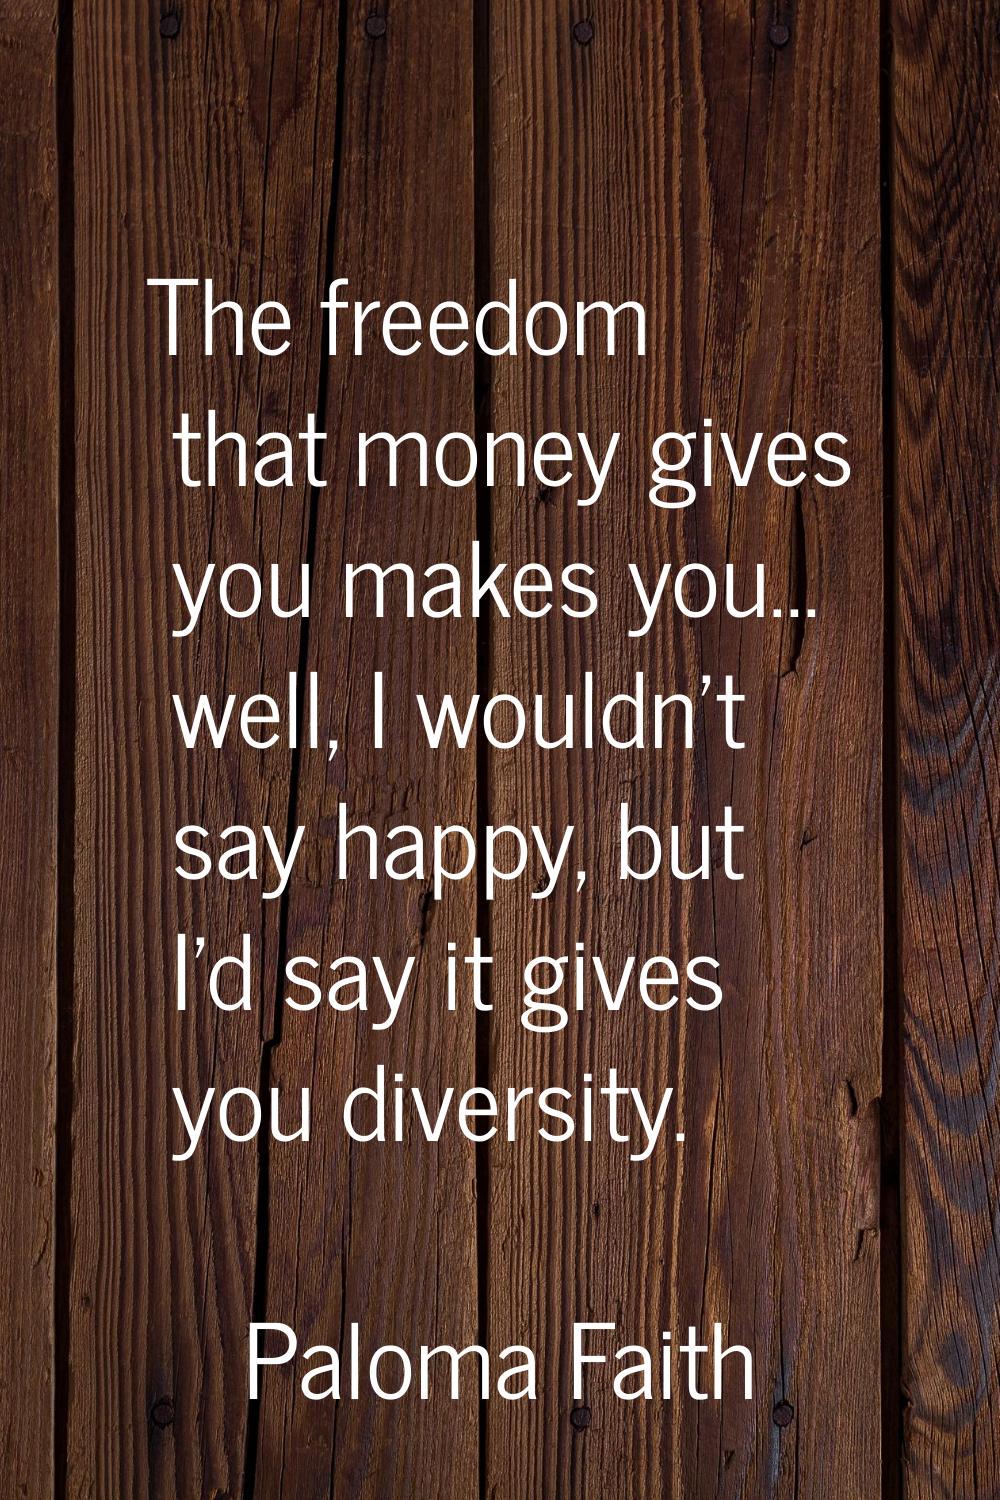 The freedom that money gives you makes you... well, I wouldn't say happy, but I'd say it gives you 